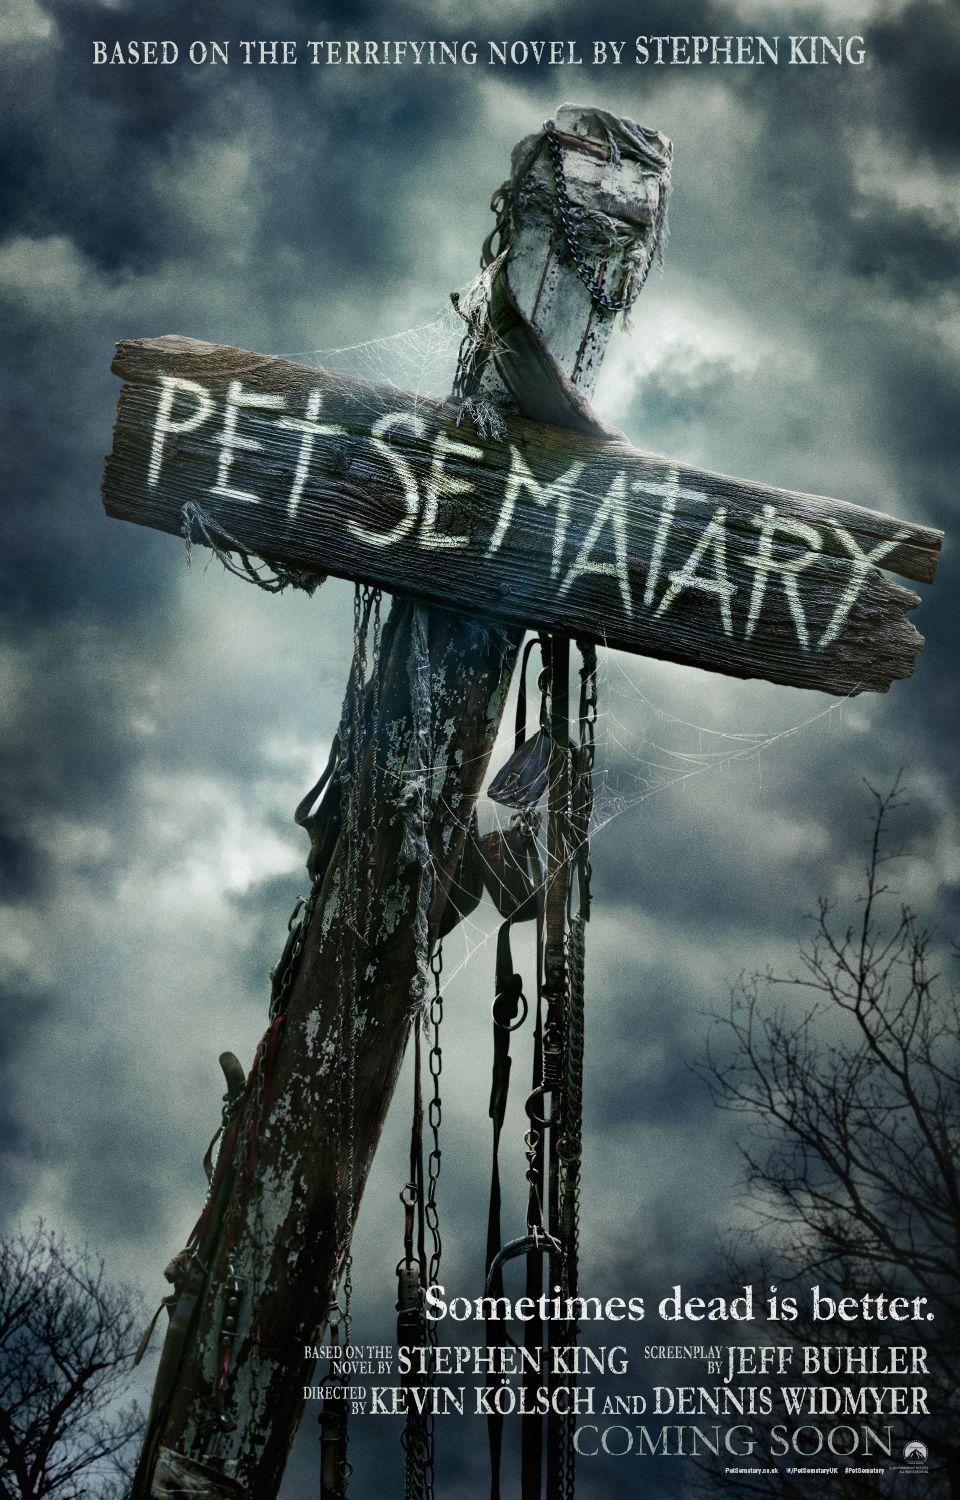 Pet Sematary': Check out the first trailer for the Stephen King